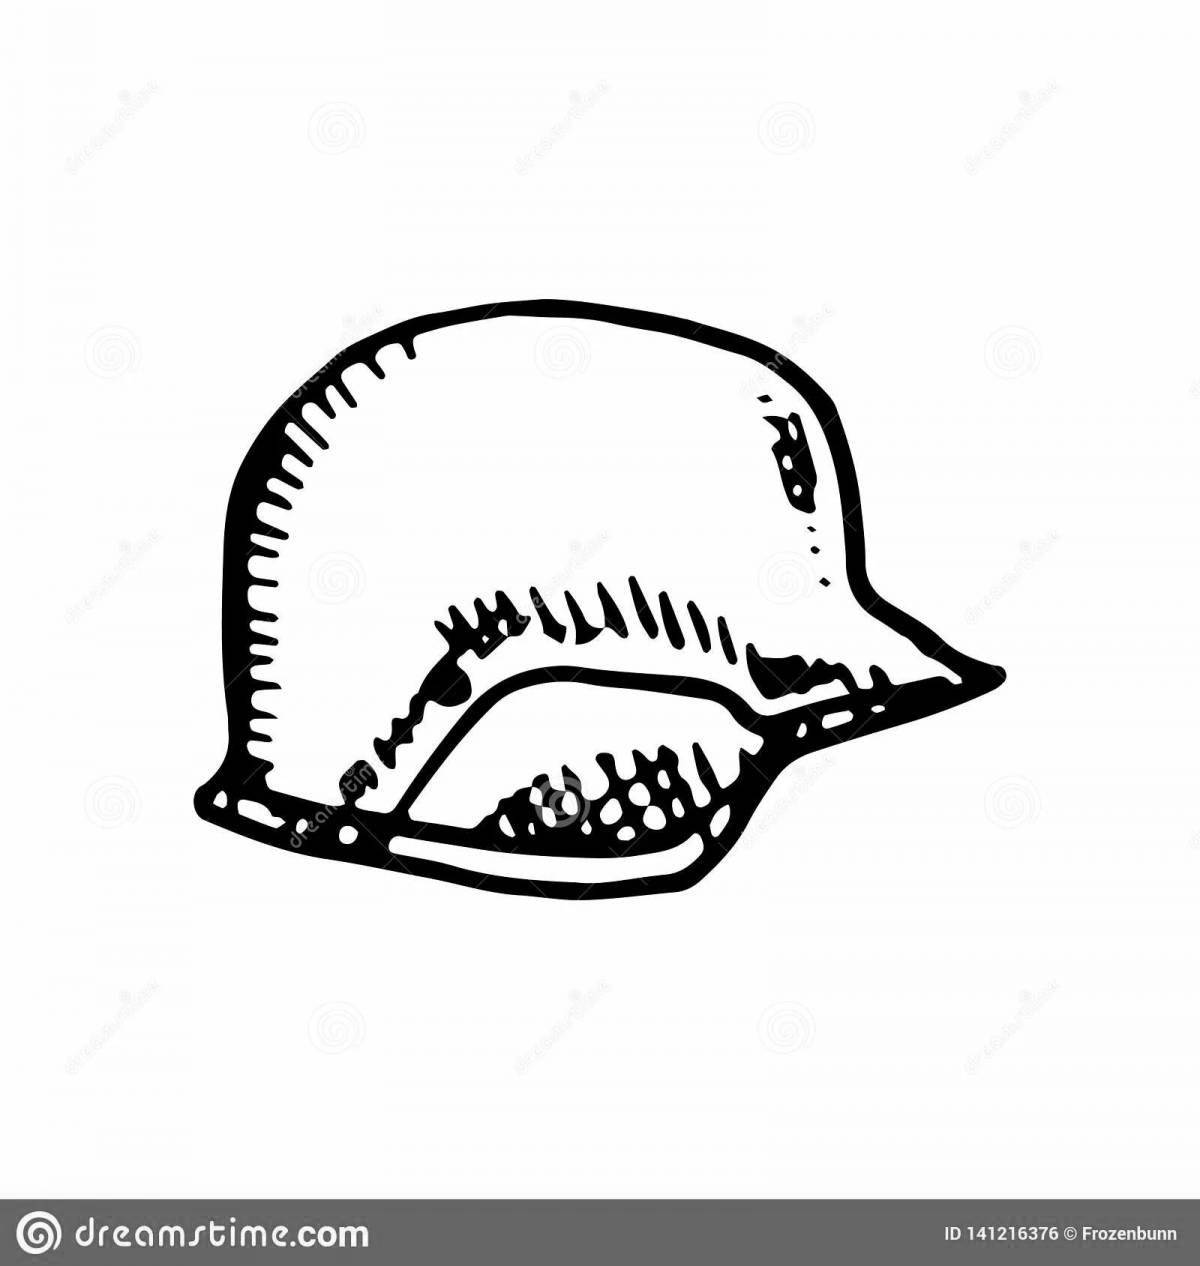 Glowing military helmet coloring page